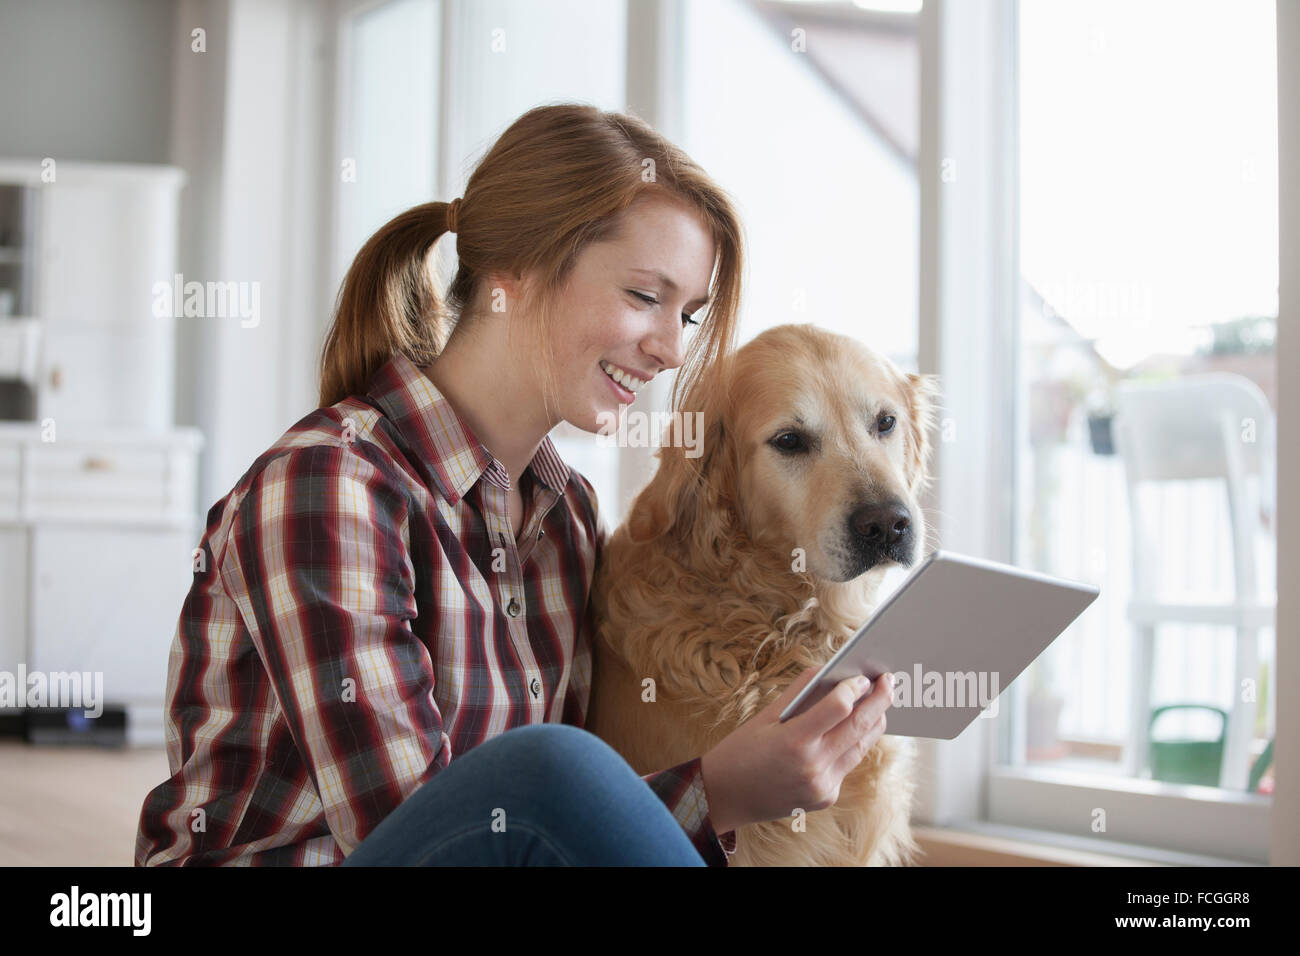 Smiling young woman sitting beside her dog looking at digital tablet Stock Photo